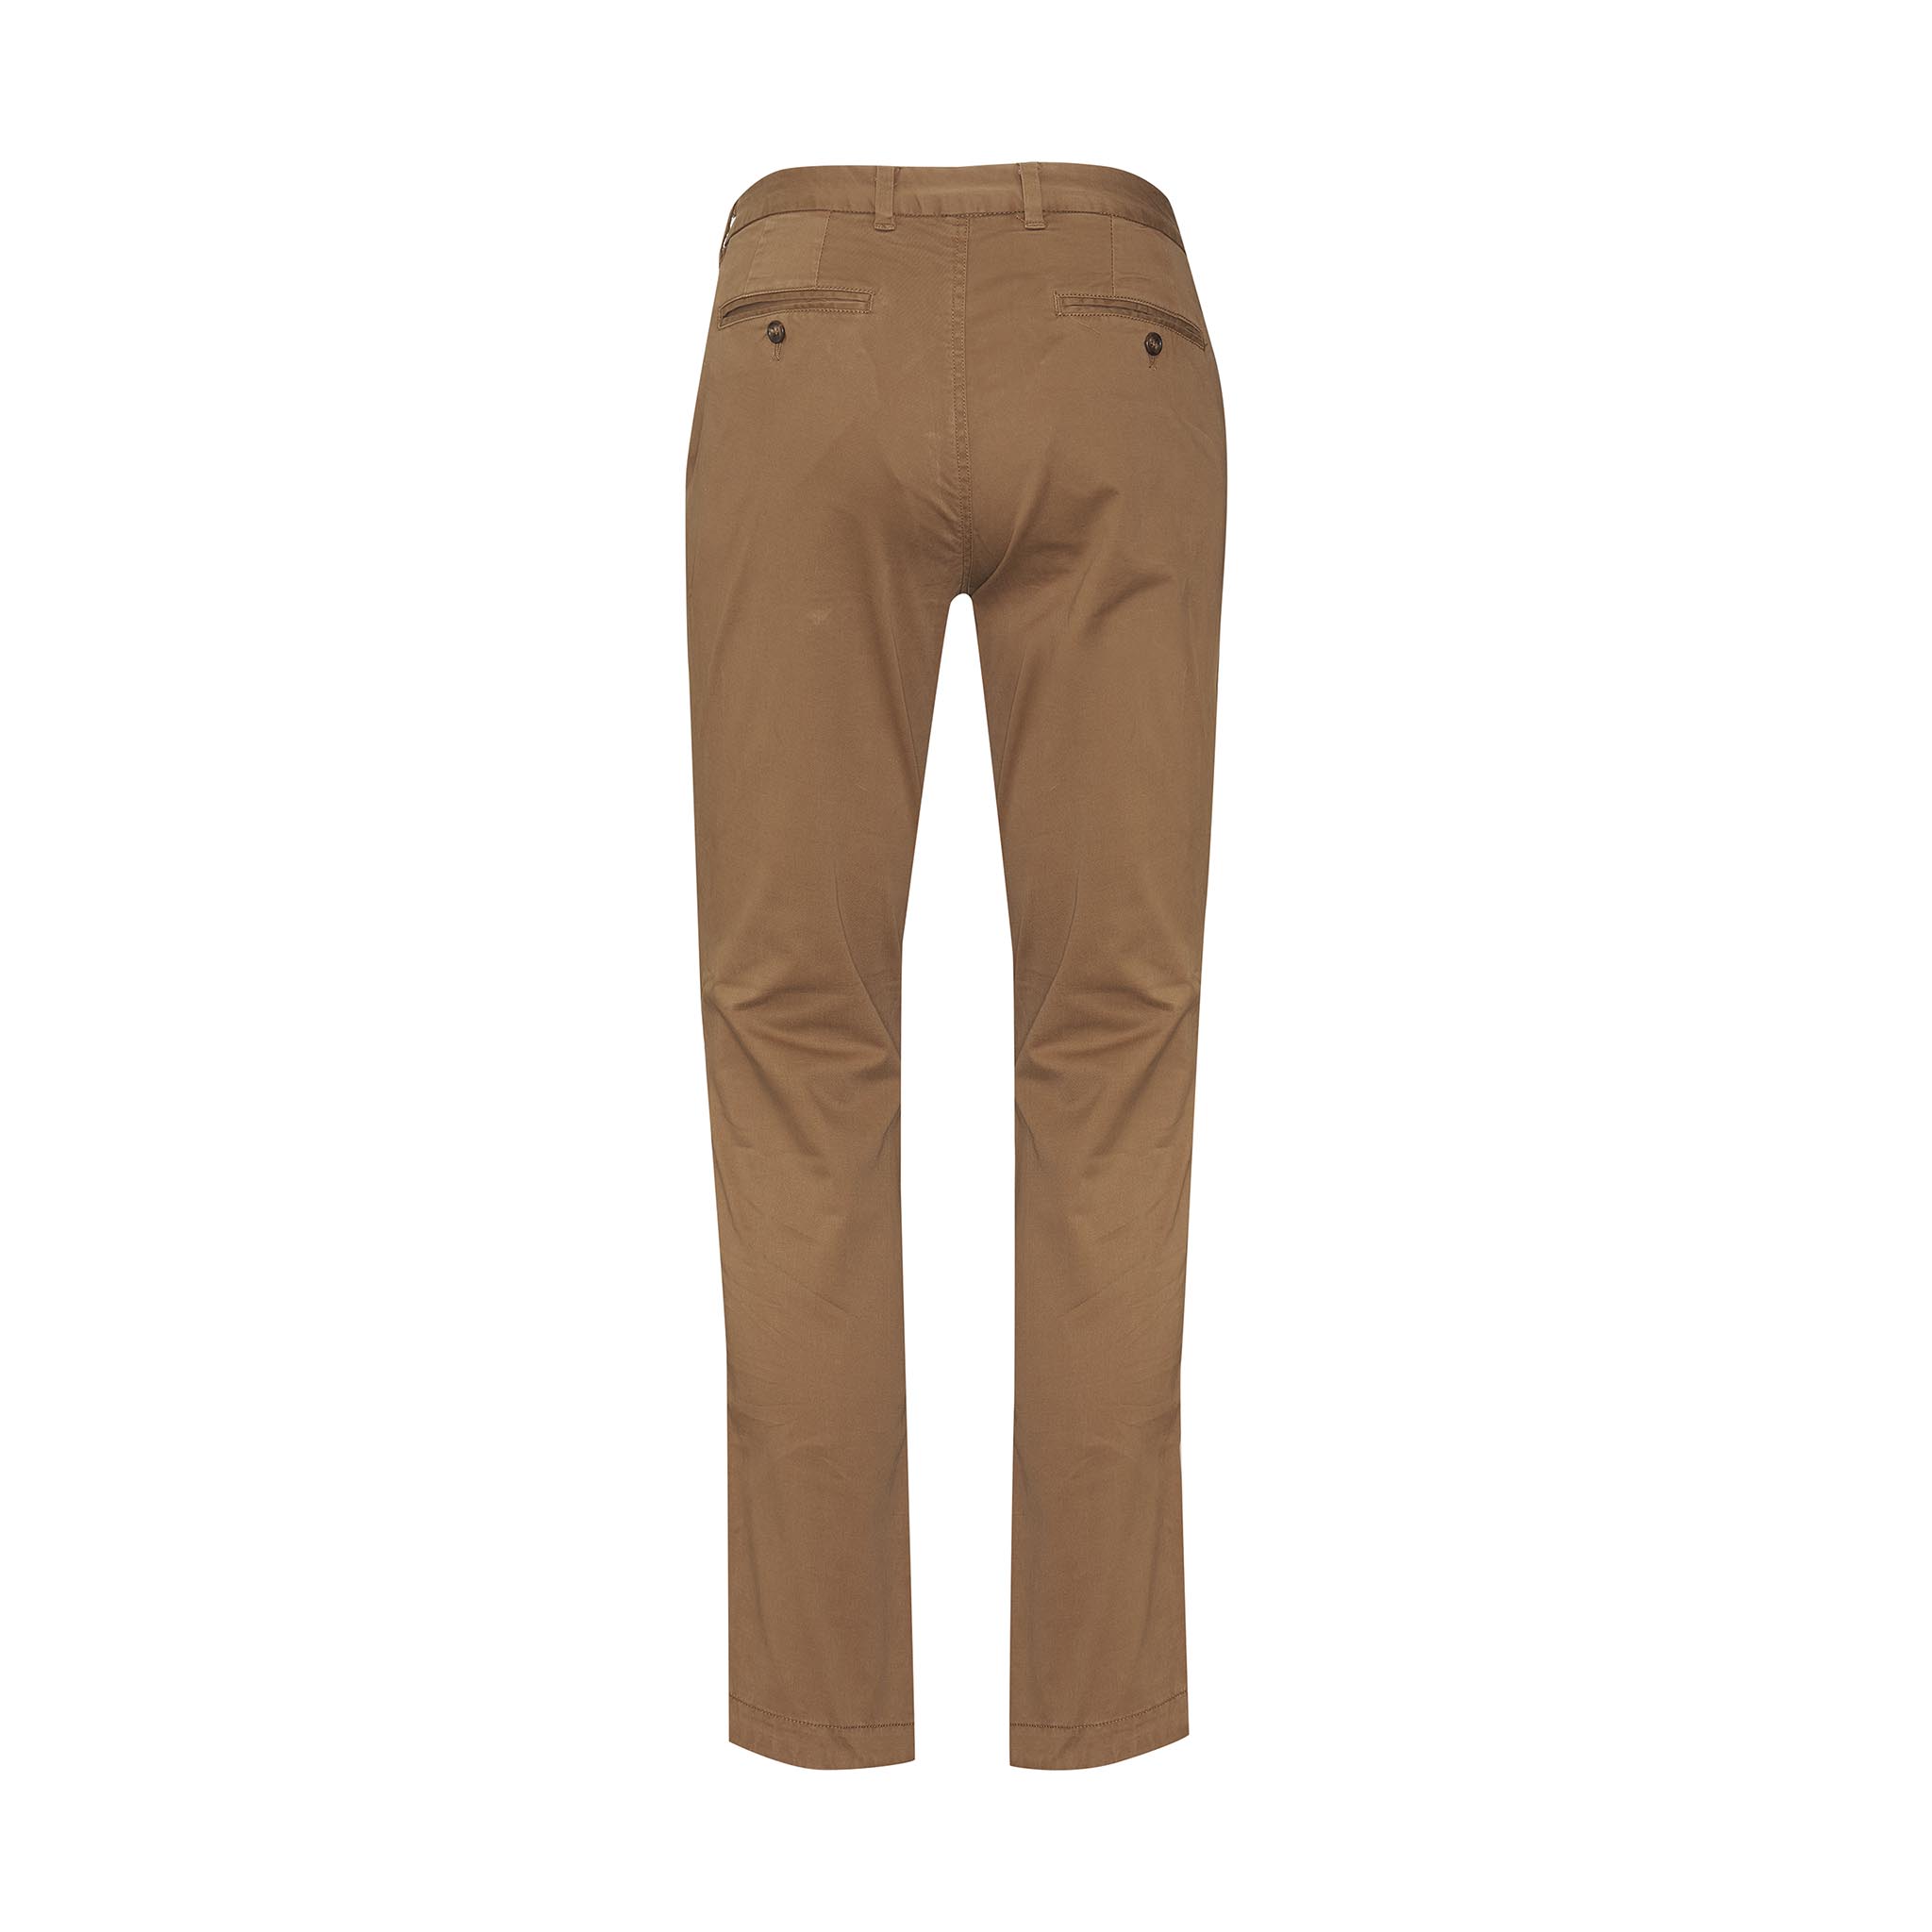 Career Cotton-Blend Chino